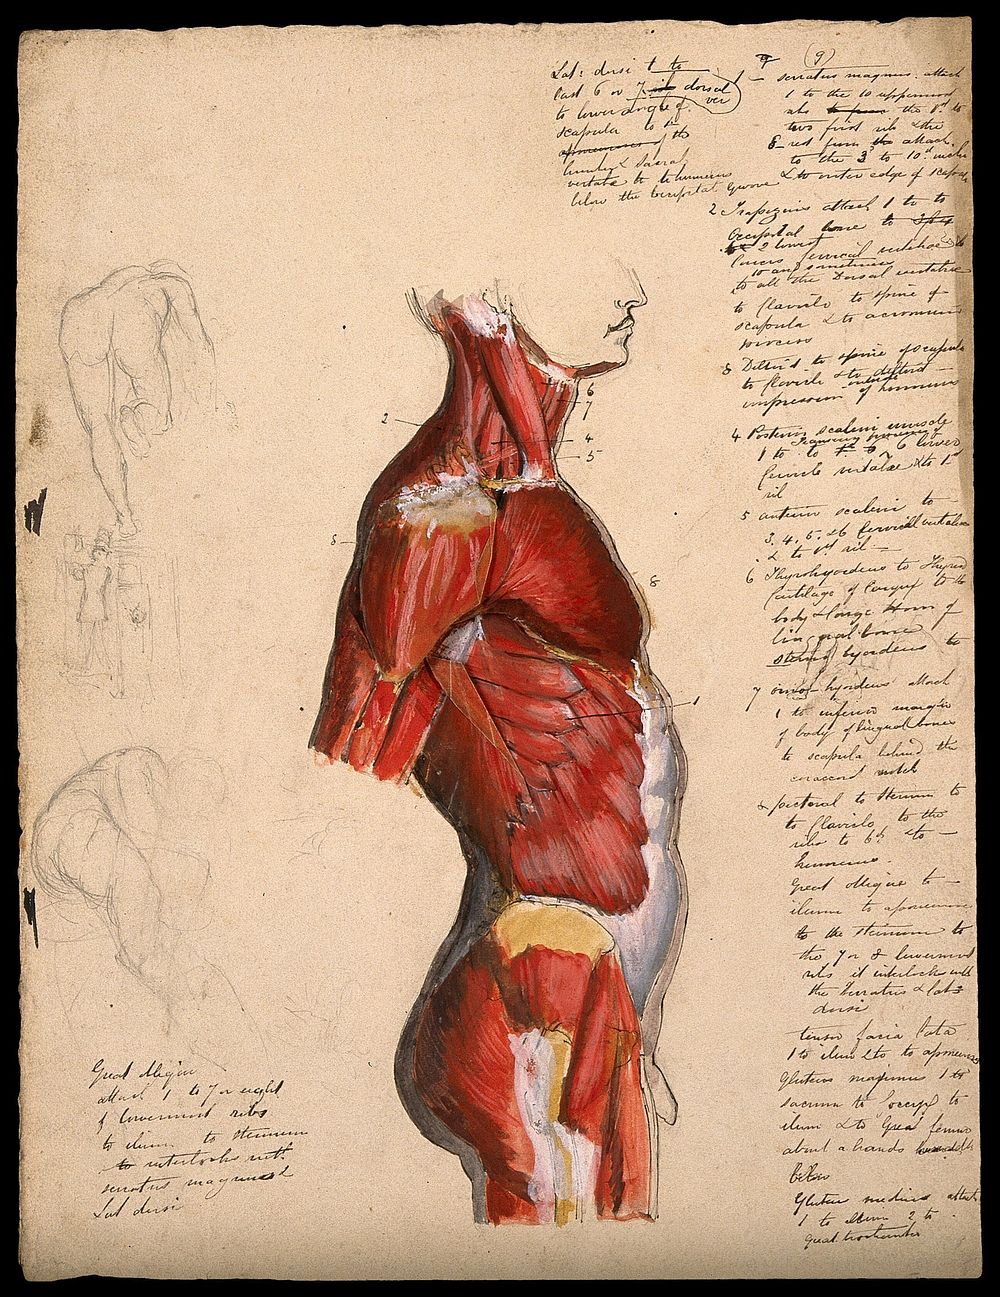 Dissection of the trunk: side view, showing the bones and muscles, with small pencil sketches of a nude in various poses.…